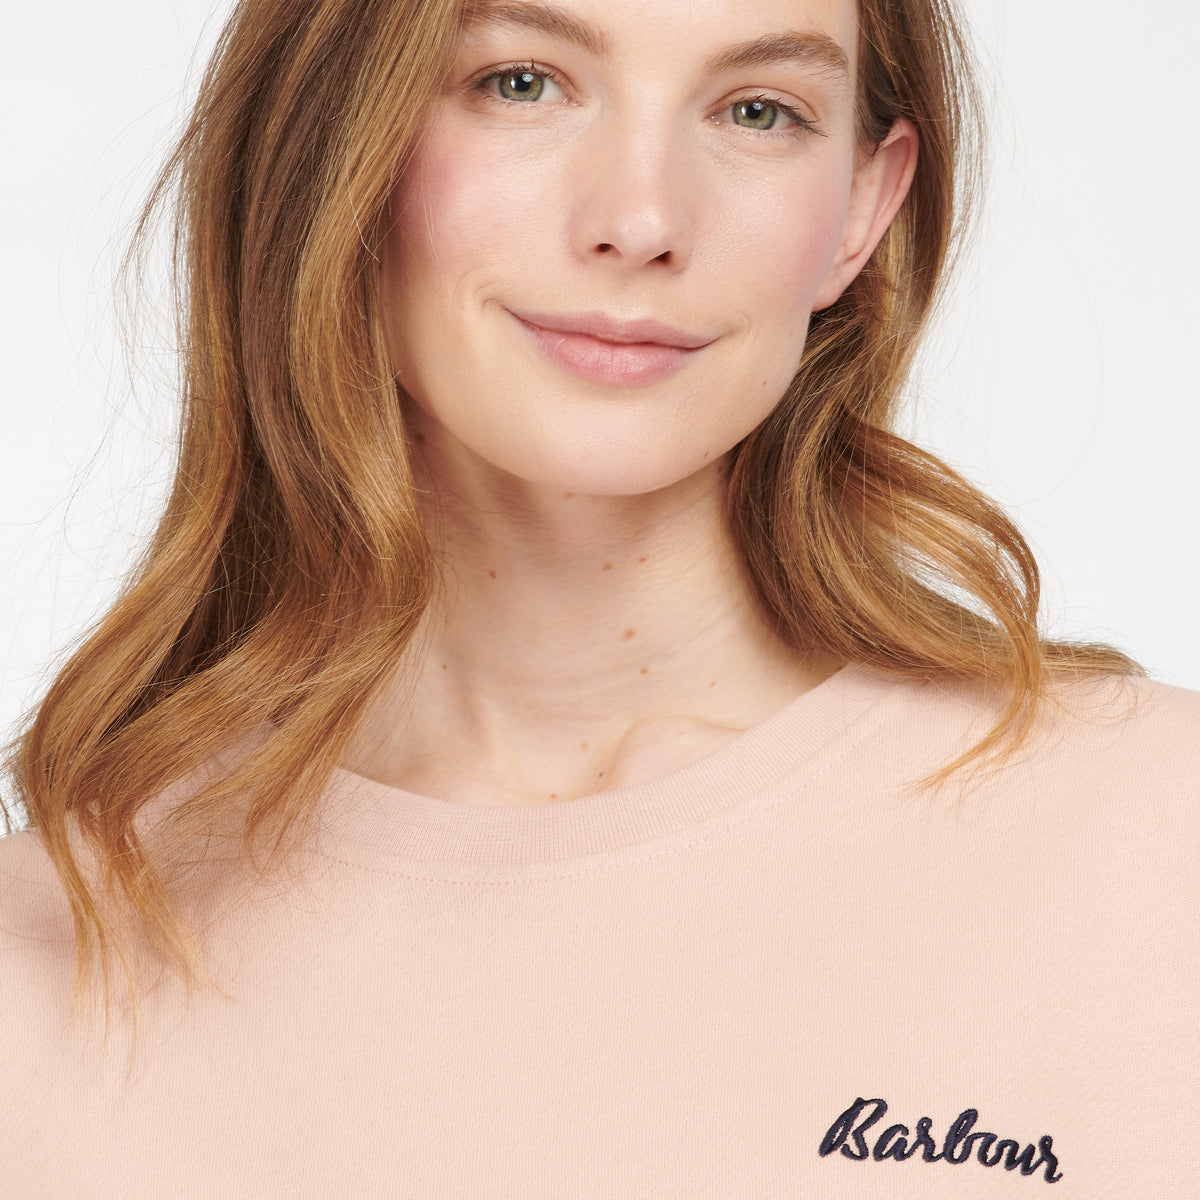 Barbour Rosie Women's Relaxed Lounge Crew Sweater | Rose Tan